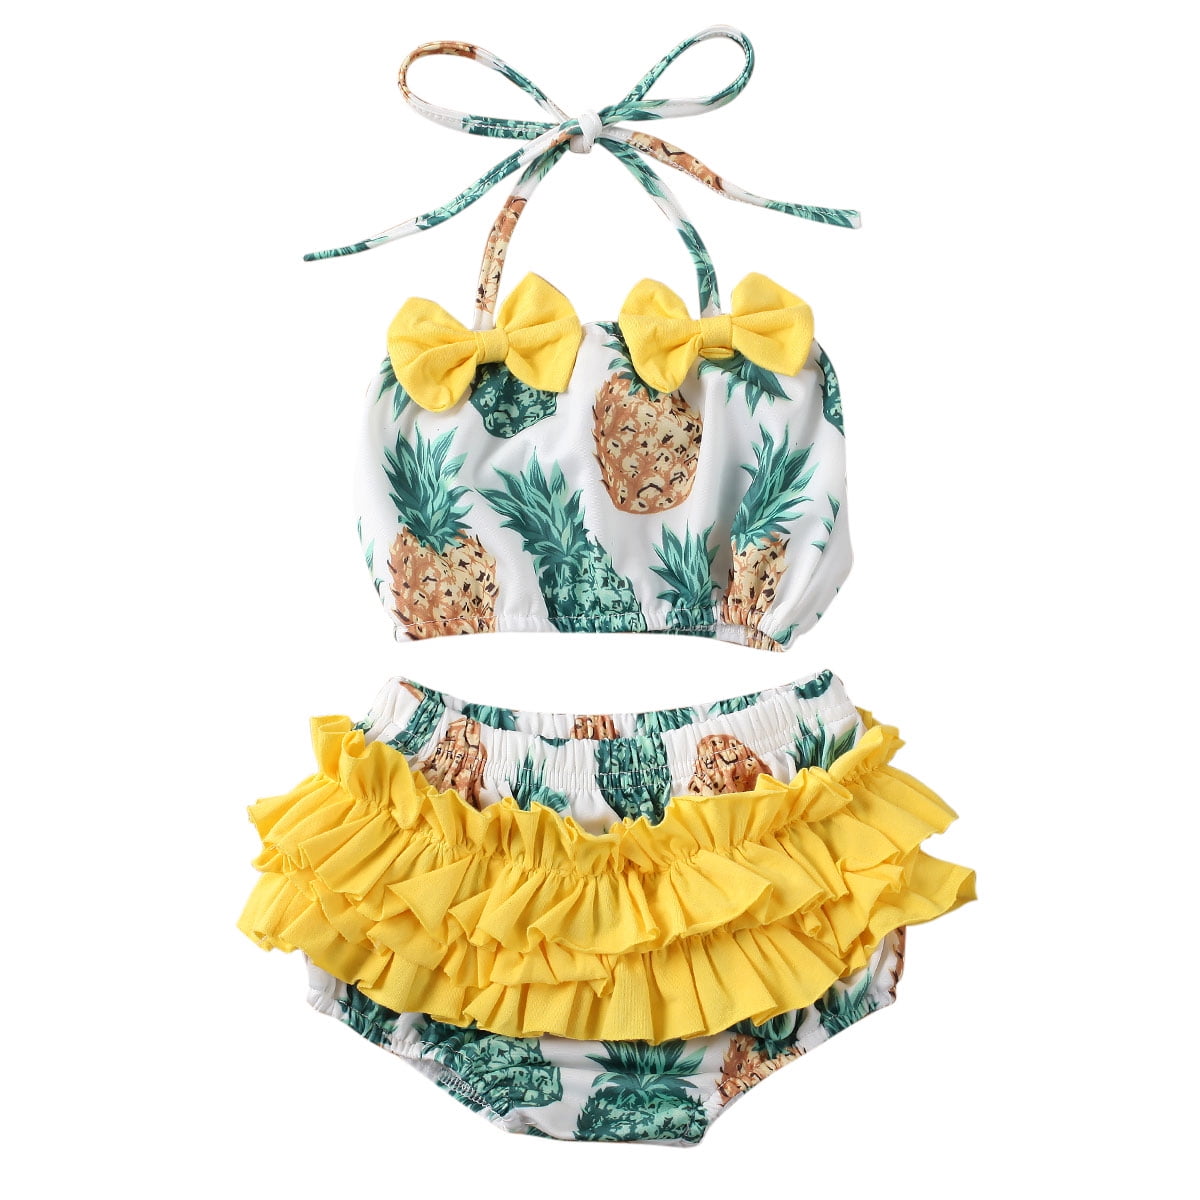 remeo suit Infant Baby Big Little Sister Pineapple Print Ruffle Matching Swimsuit Outfit Bathing Suits